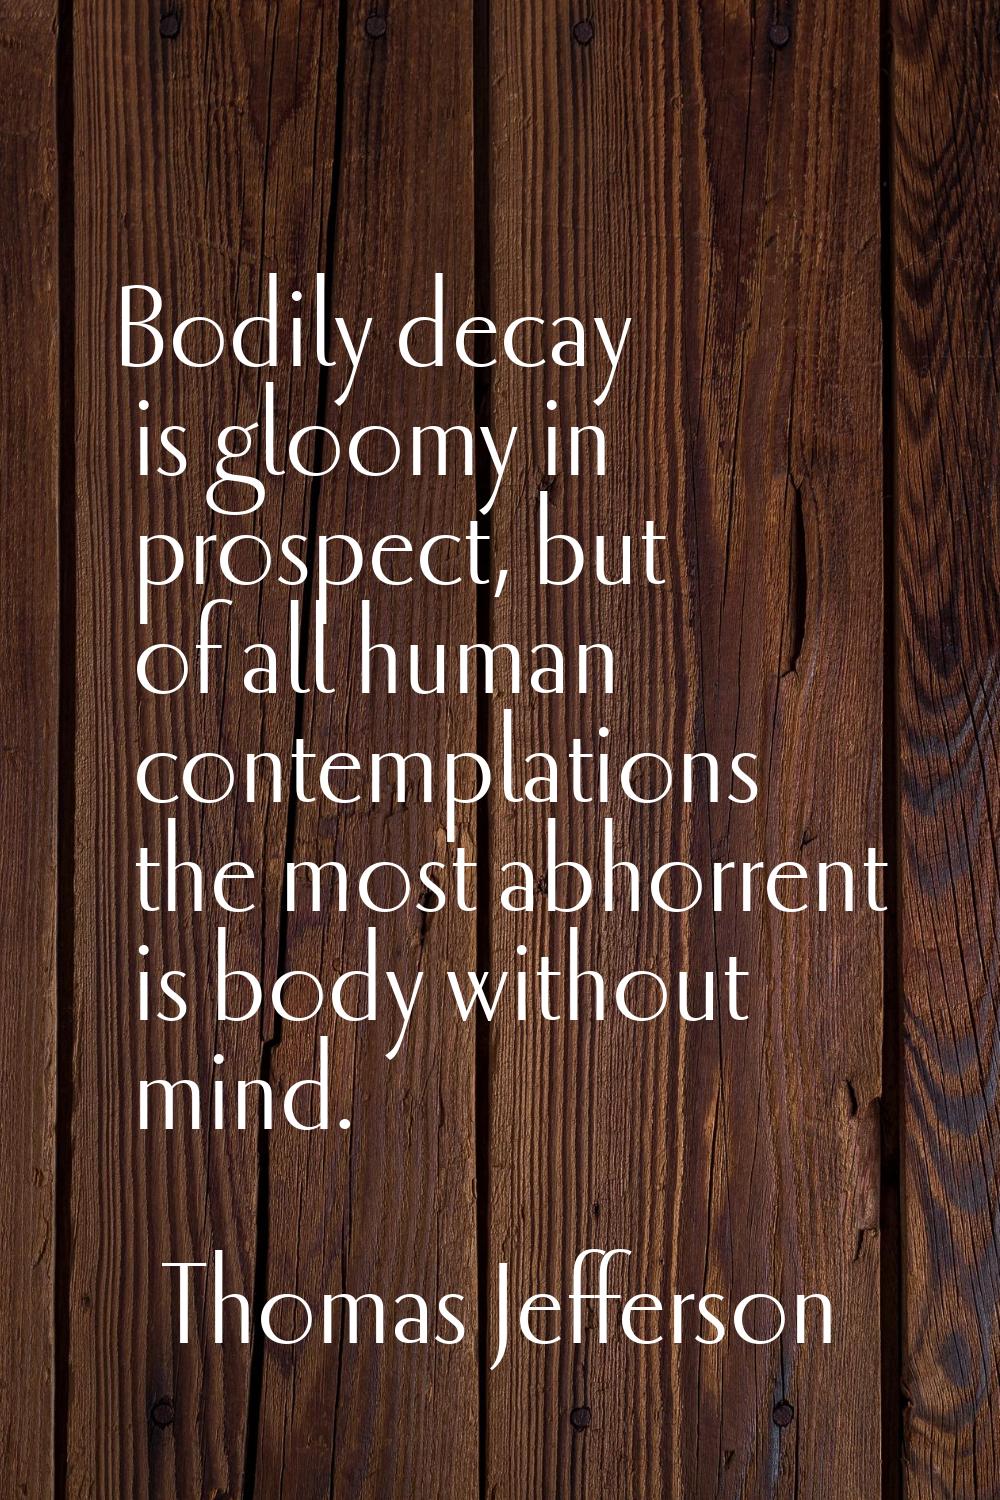 Bodily decay is gloomy in prospect, but of all human contemplations the most abhorrent is body with